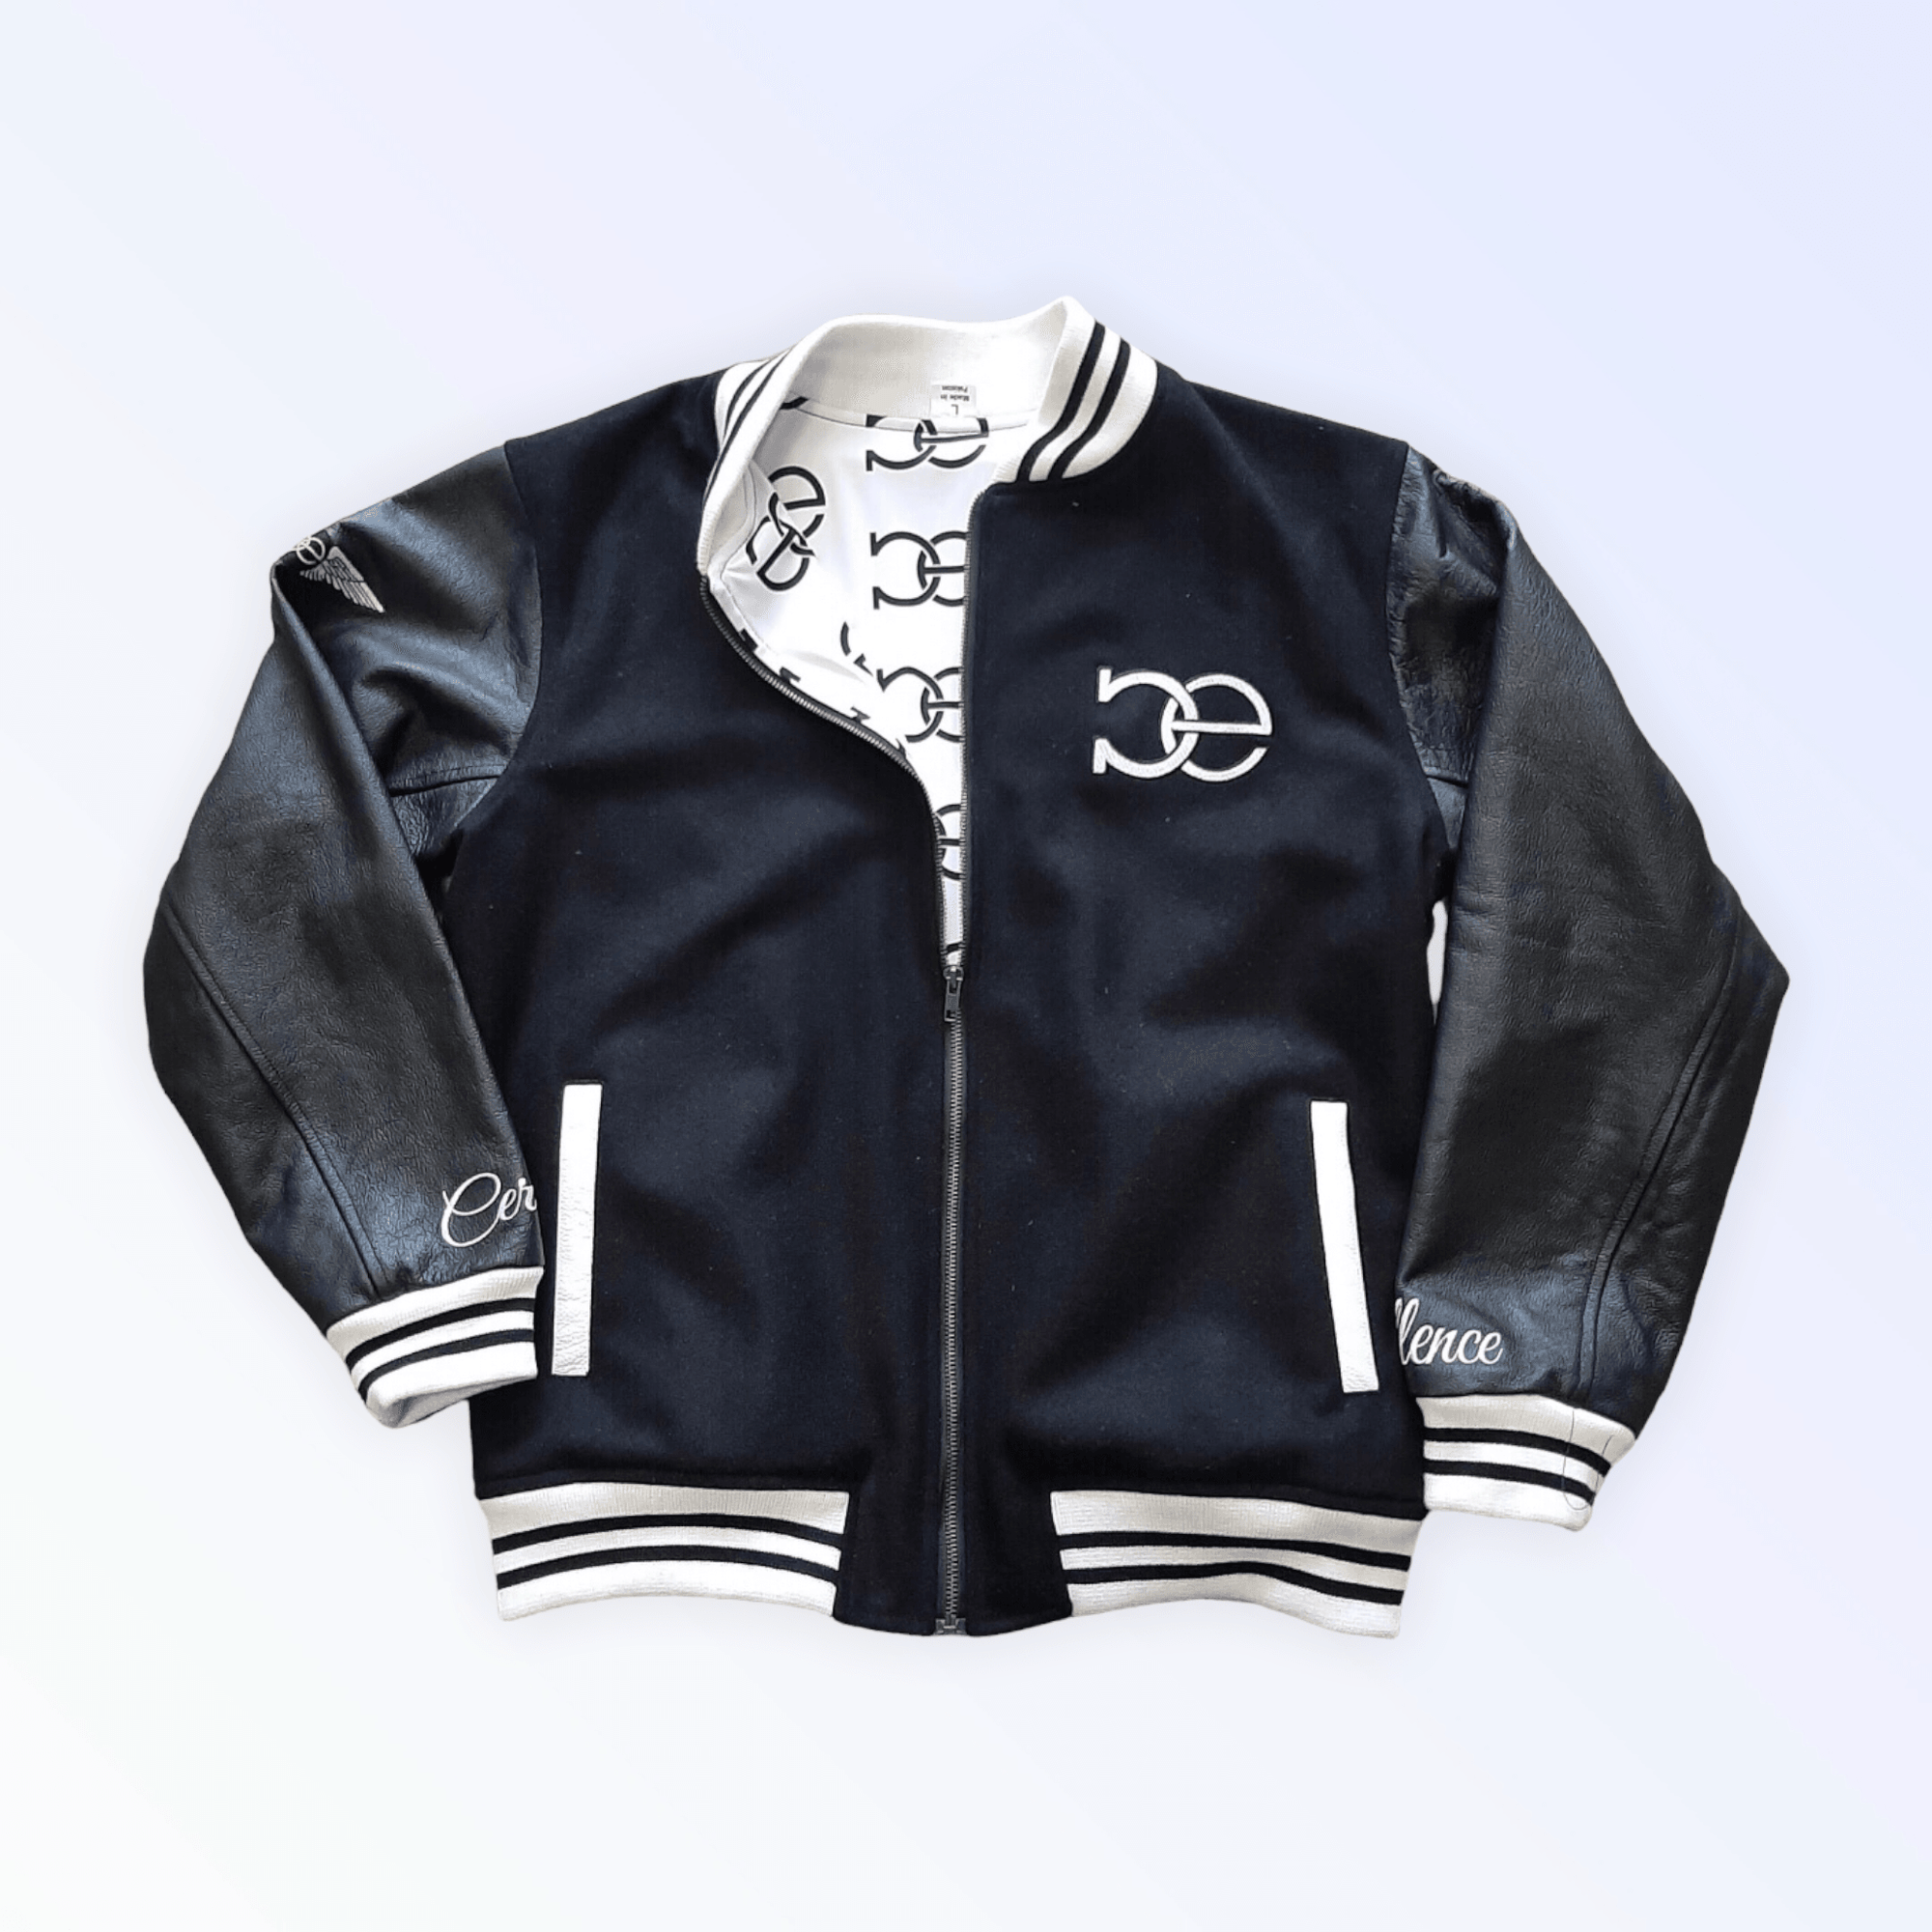 “CE” leather Varsity Jacket - Certified Excellence Clothing